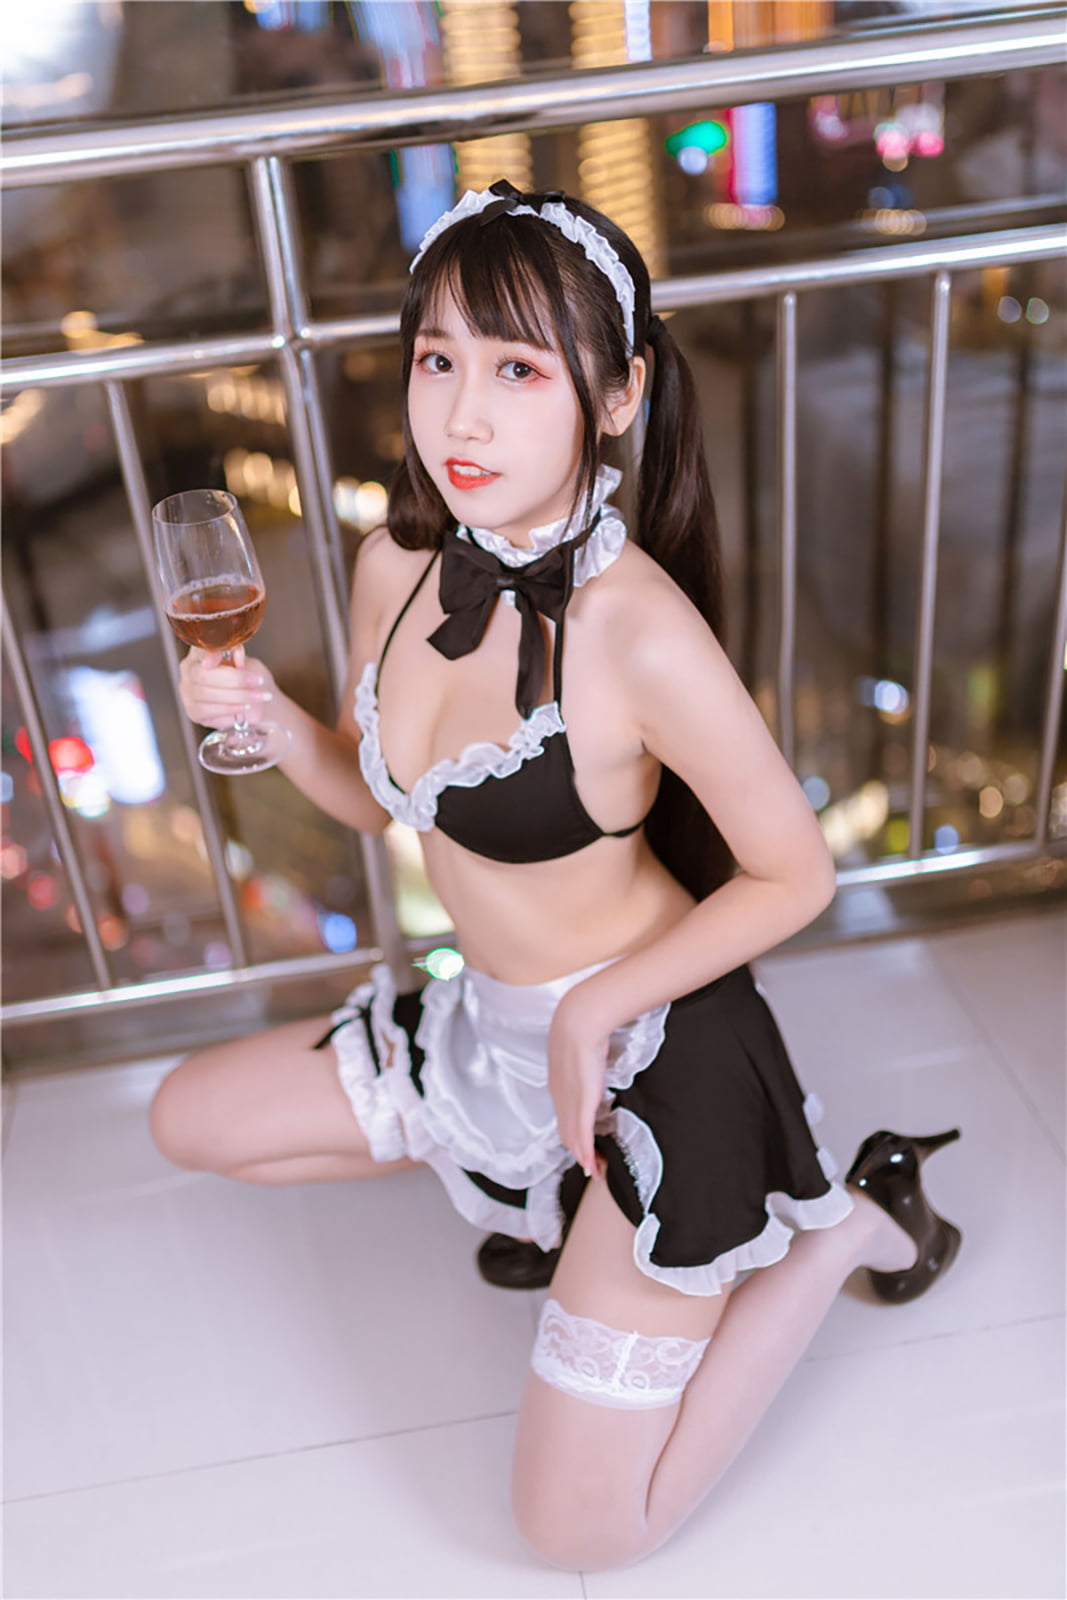 Asian, stockings, black stockings, pantihose, maid outfit, lace underwear